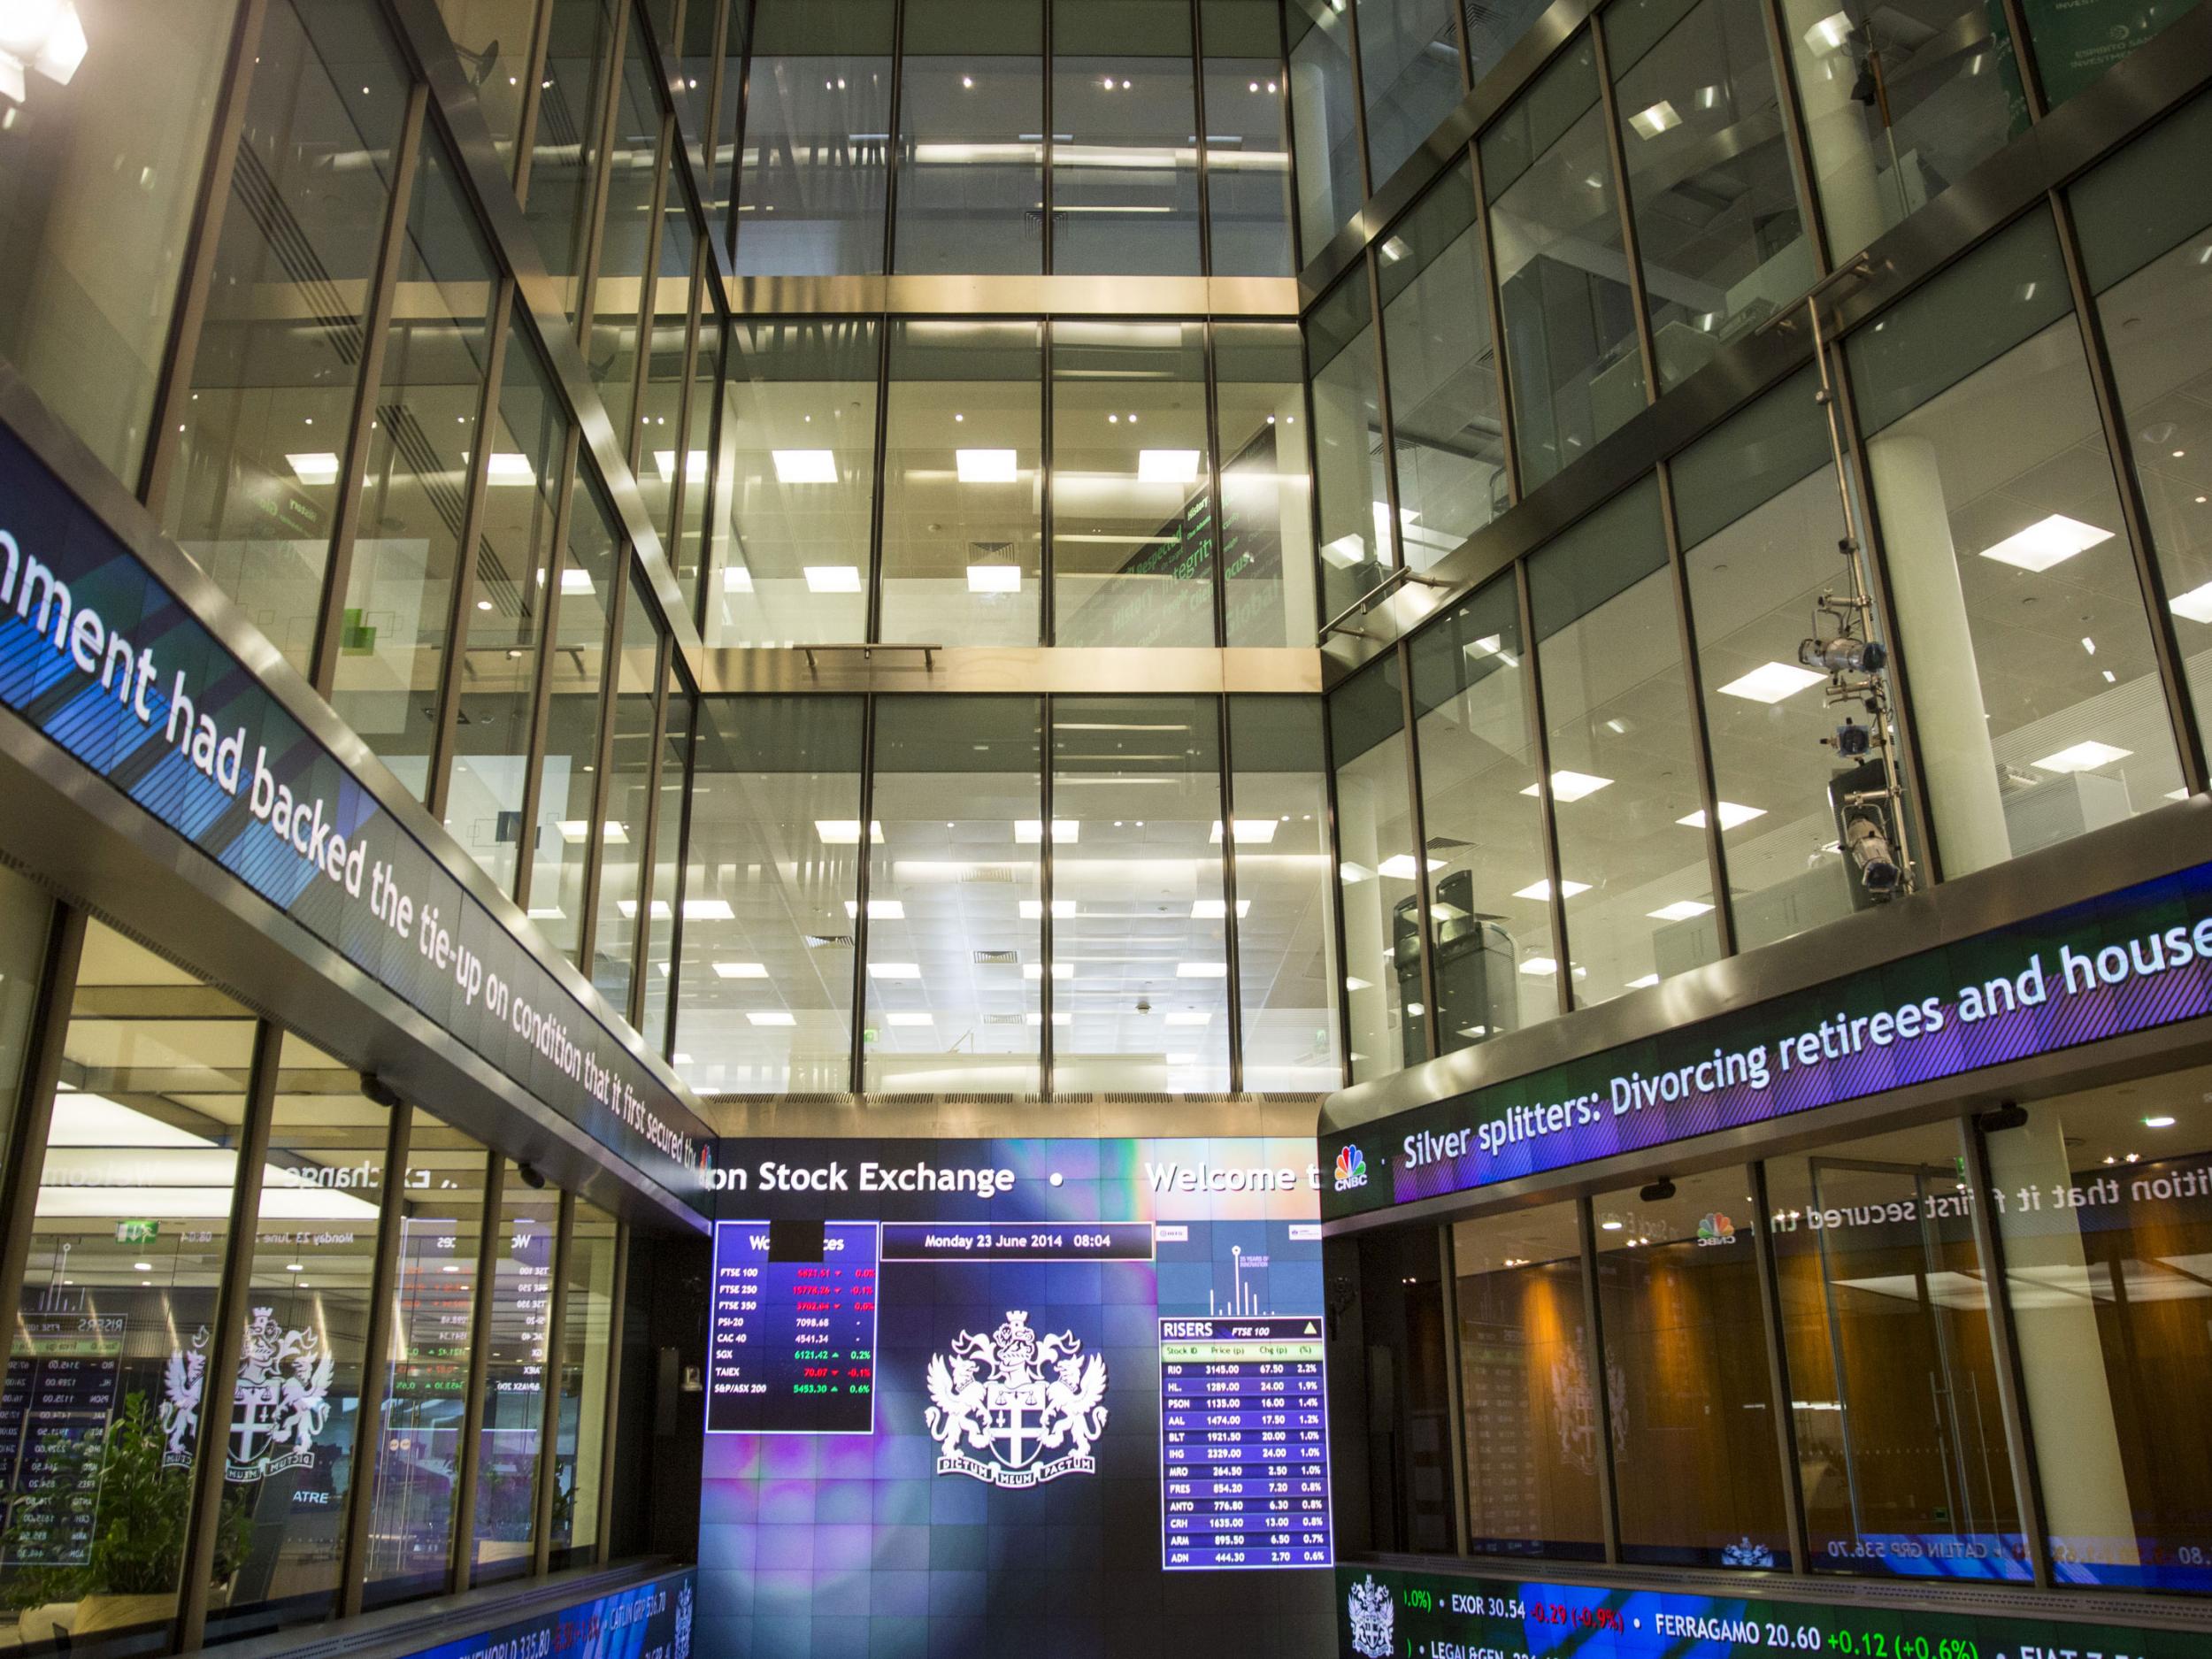 City worker dies plunging from seventh floor of London Stock Exchange